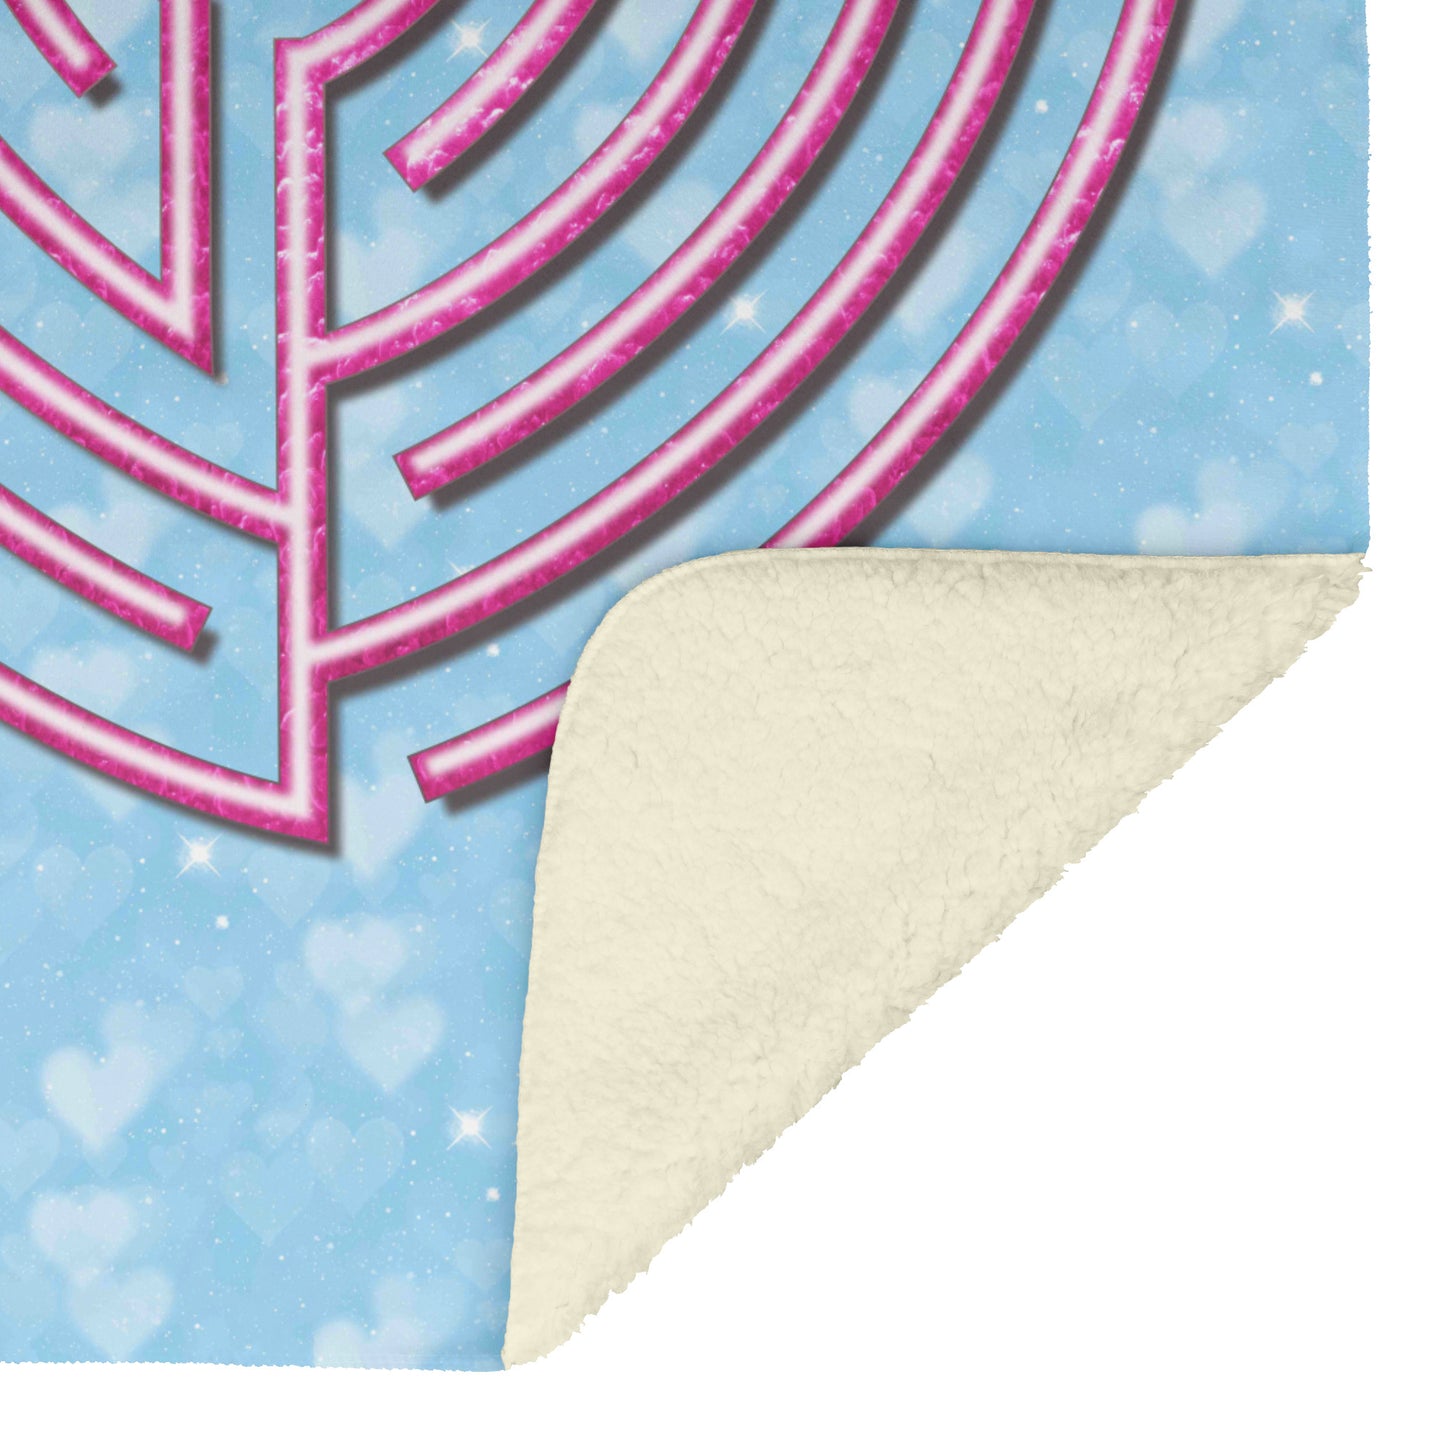 Heart Labyrinth Therapy Blanket - Blue